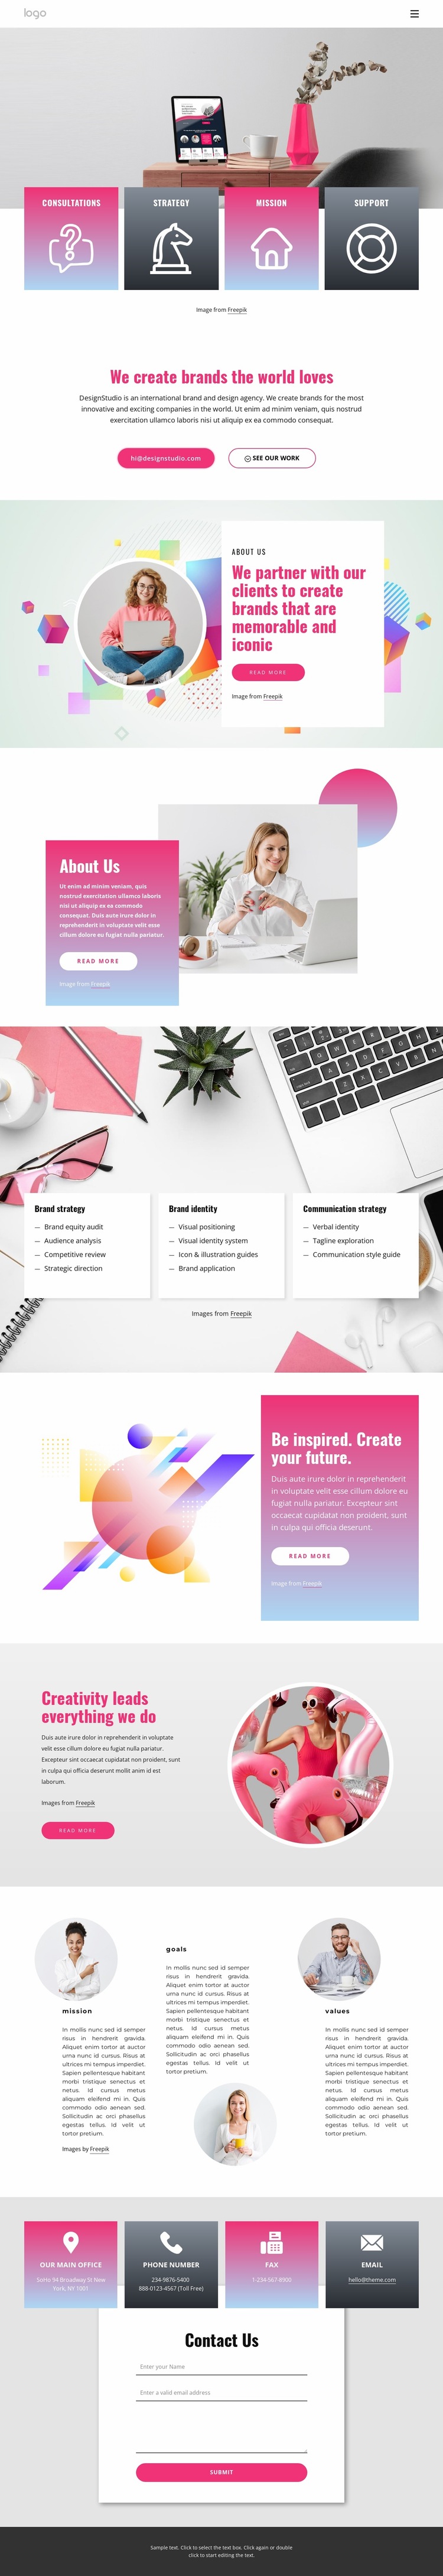 Creativity leads everything we do Website Builder Templates